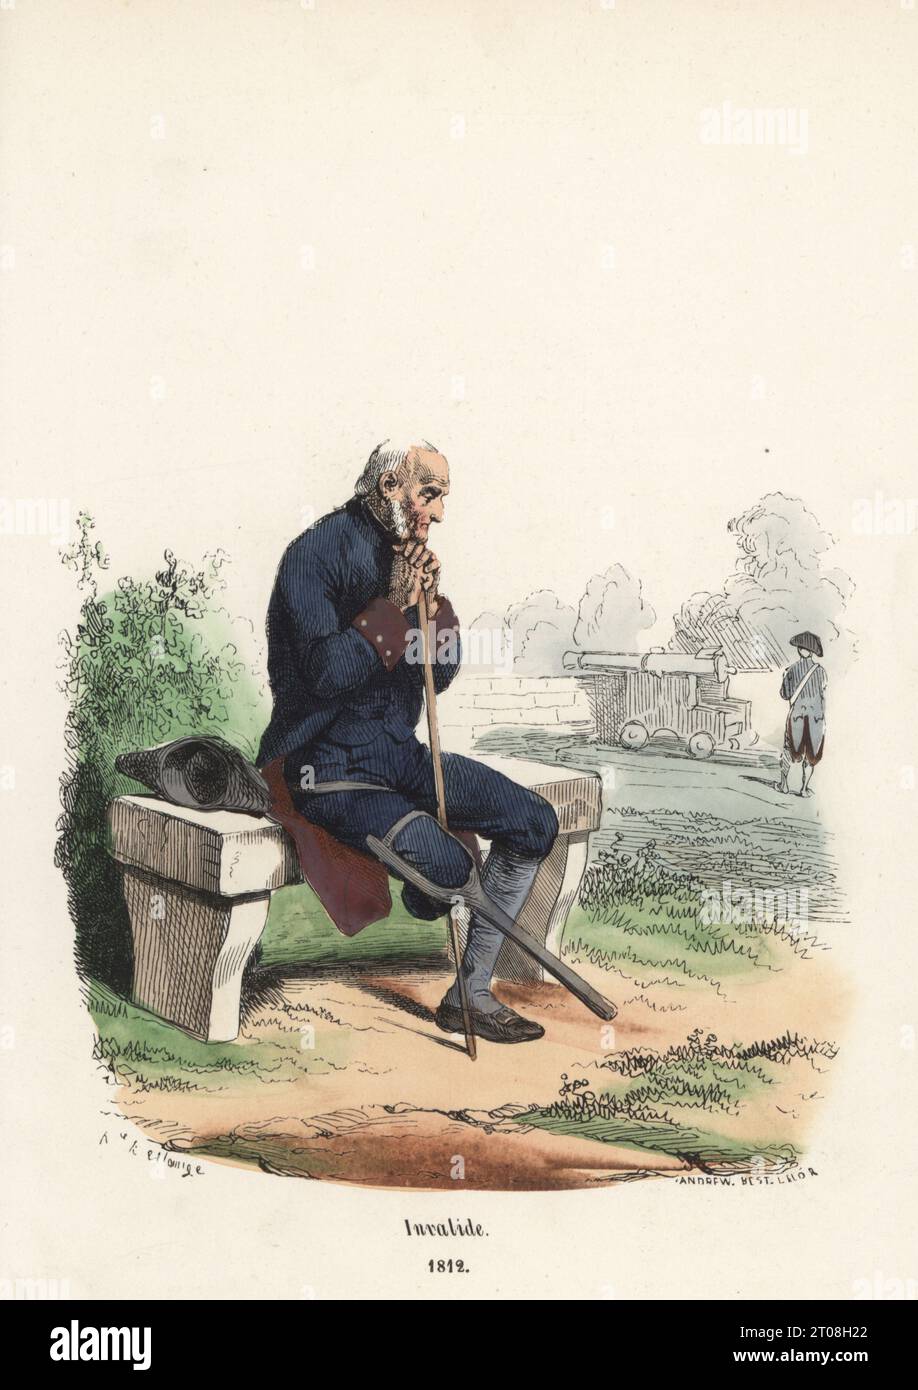 Uniform of a French veteran soldier, 1812. In bicorne, blue tailcoat and breeches, hose and buckle shoes, wooden leg. Invalide, 1812. Handcoloured woodcut by Andrew Best Leloir after an illustration by Hippolyte Bellangé from P.M. Laurent de l’Ardeche’s Histoire de Napoleon, Paris, 1840. Stock Photo